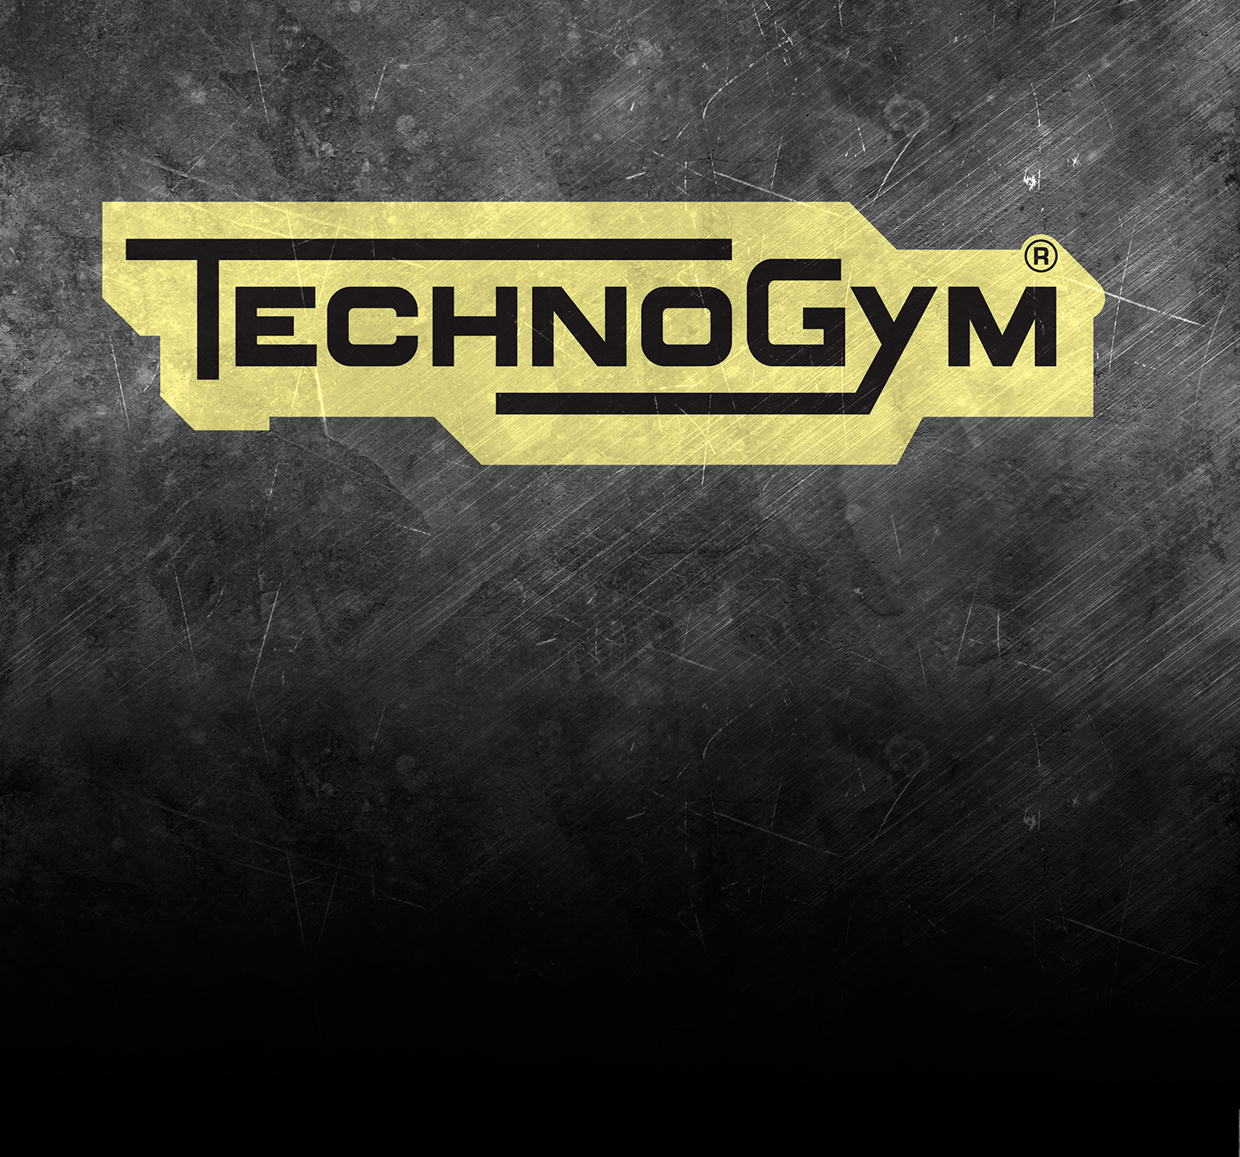 Technogym Pure Strenght on Student Show